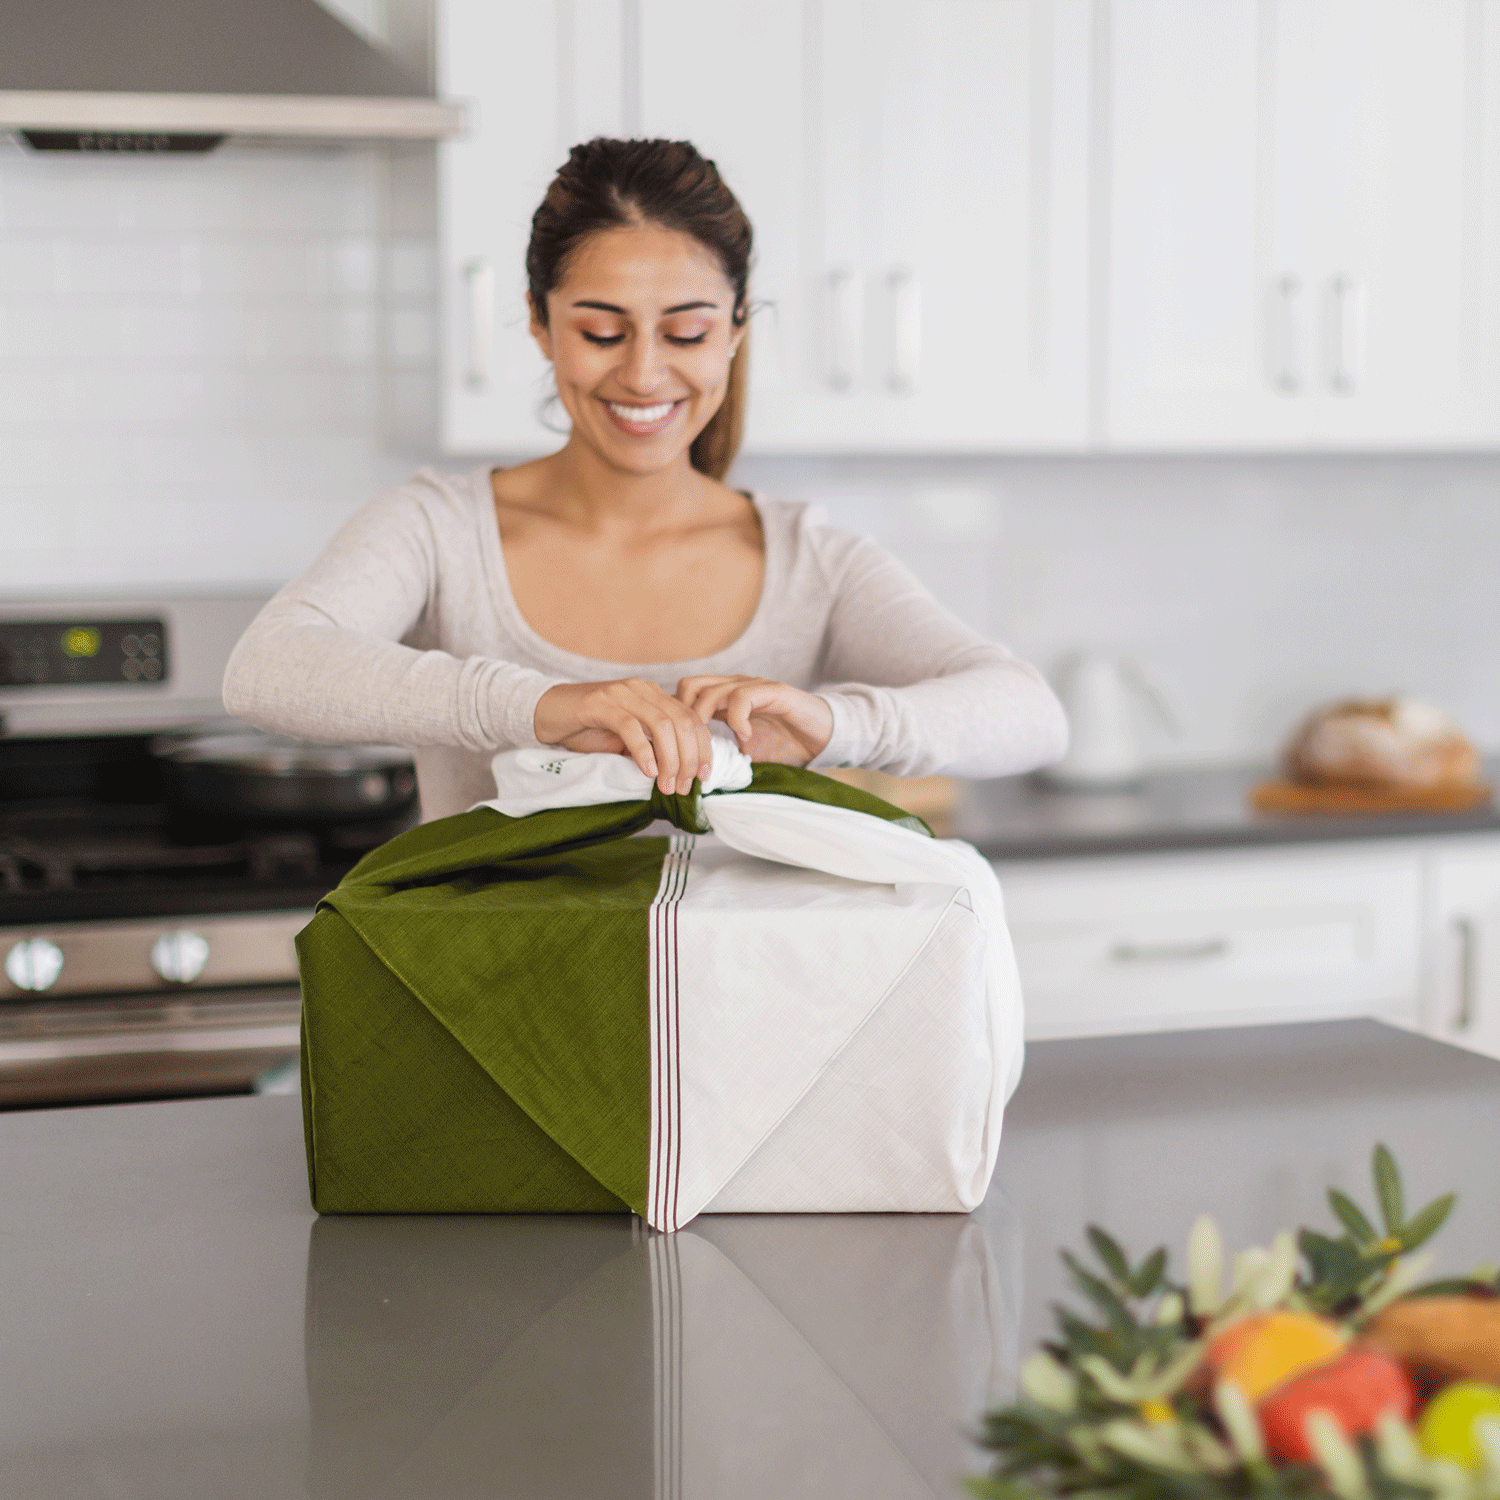 A smiling recipient of the Matcha Maker Gift Kit removes the furoshiki gift wrap and pulls out the machine.